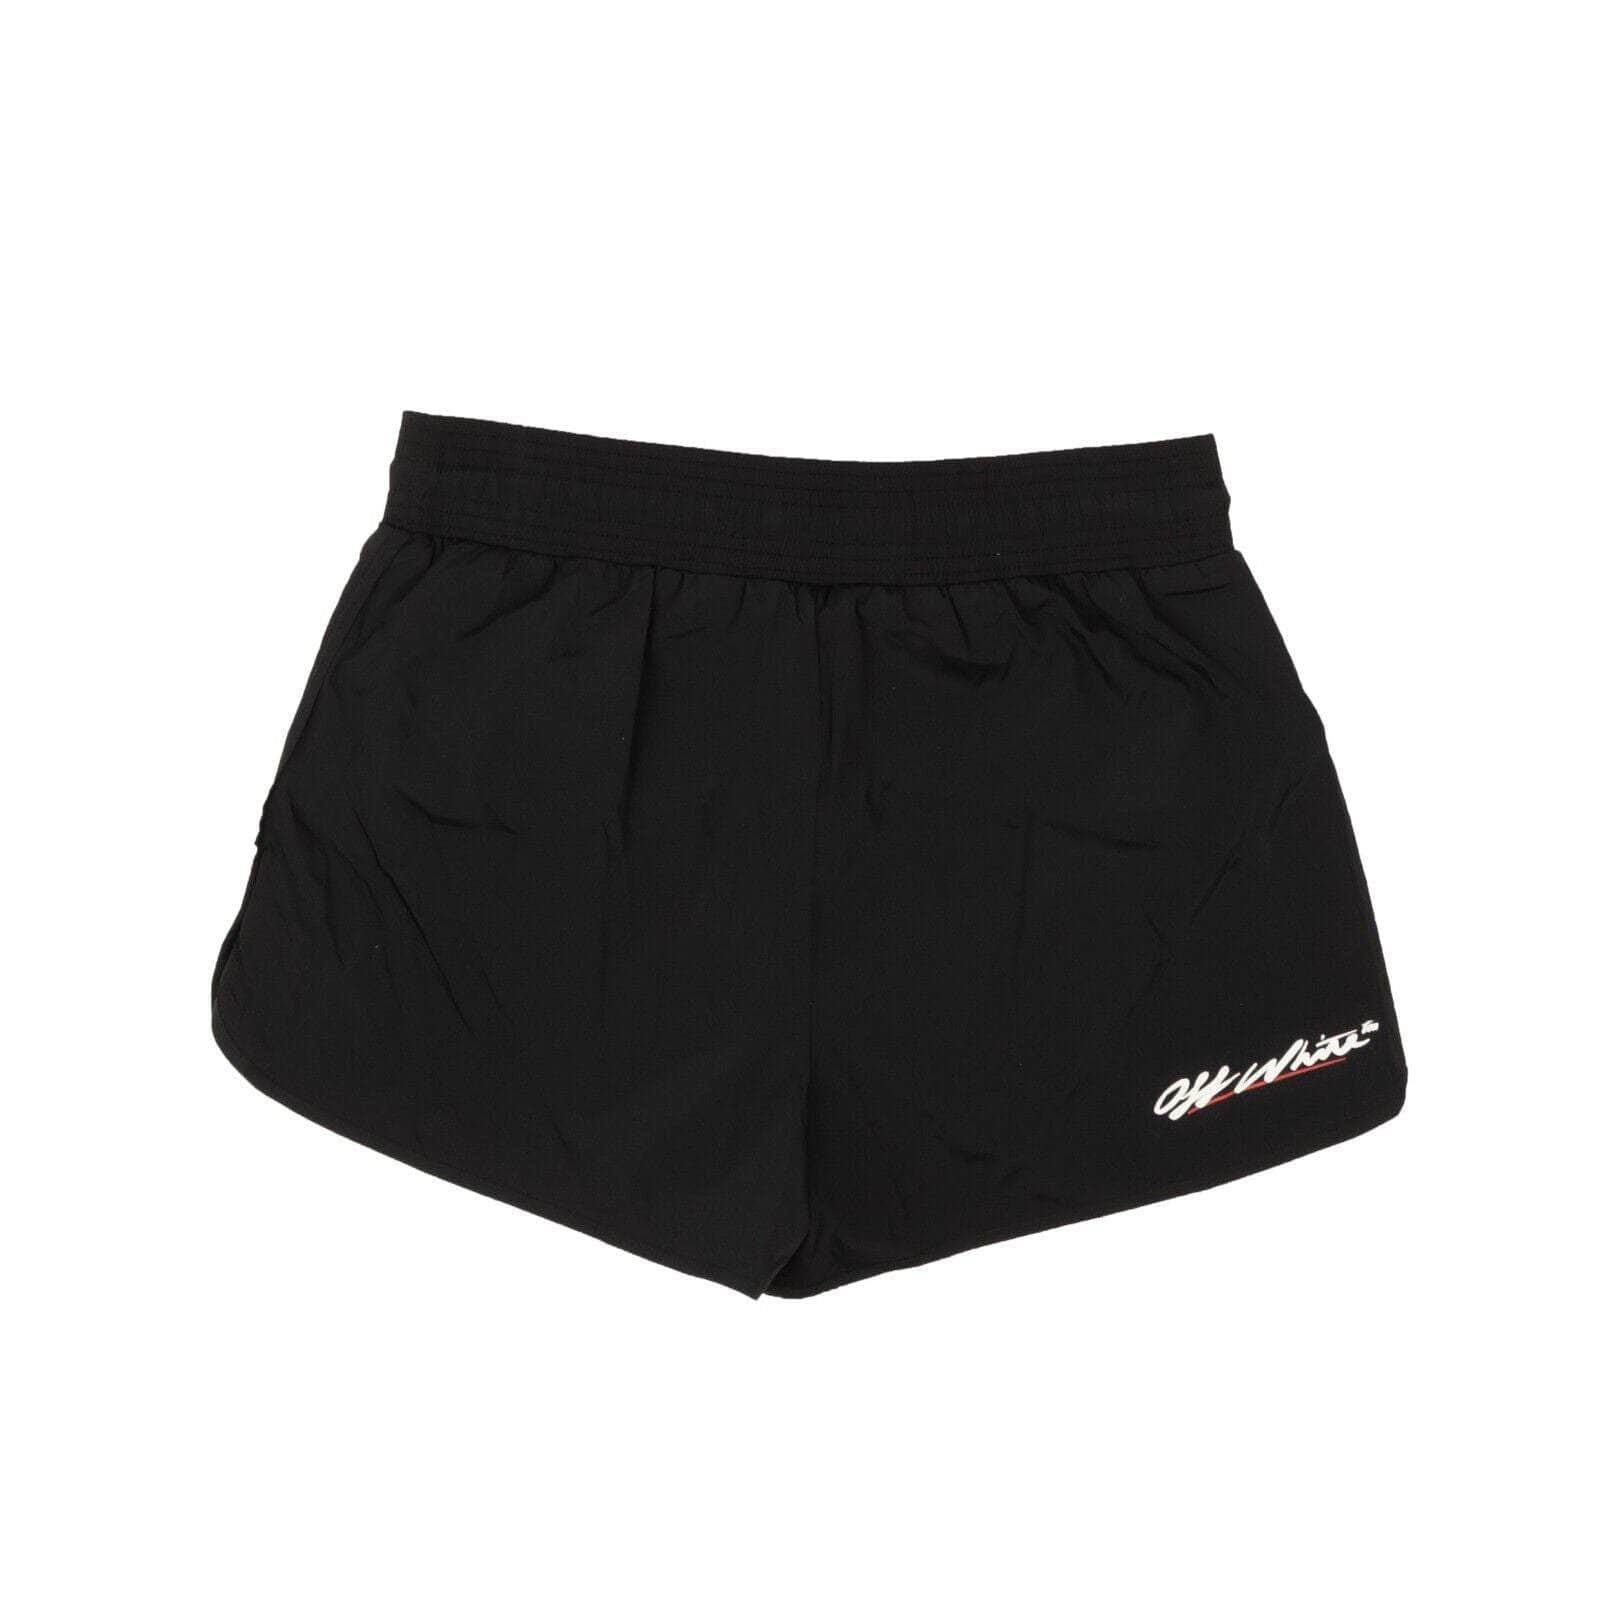 Off-White c/o Virgil Abloh 250-500, channelenable-all, chicmi, couponcollection, gender-womens, main-clothing, off-white-c-o-virgil-abloh, size-m M Black Athleisure Running Shorts OFW-XBTM-0023/M OFW-XBTM-0023/M